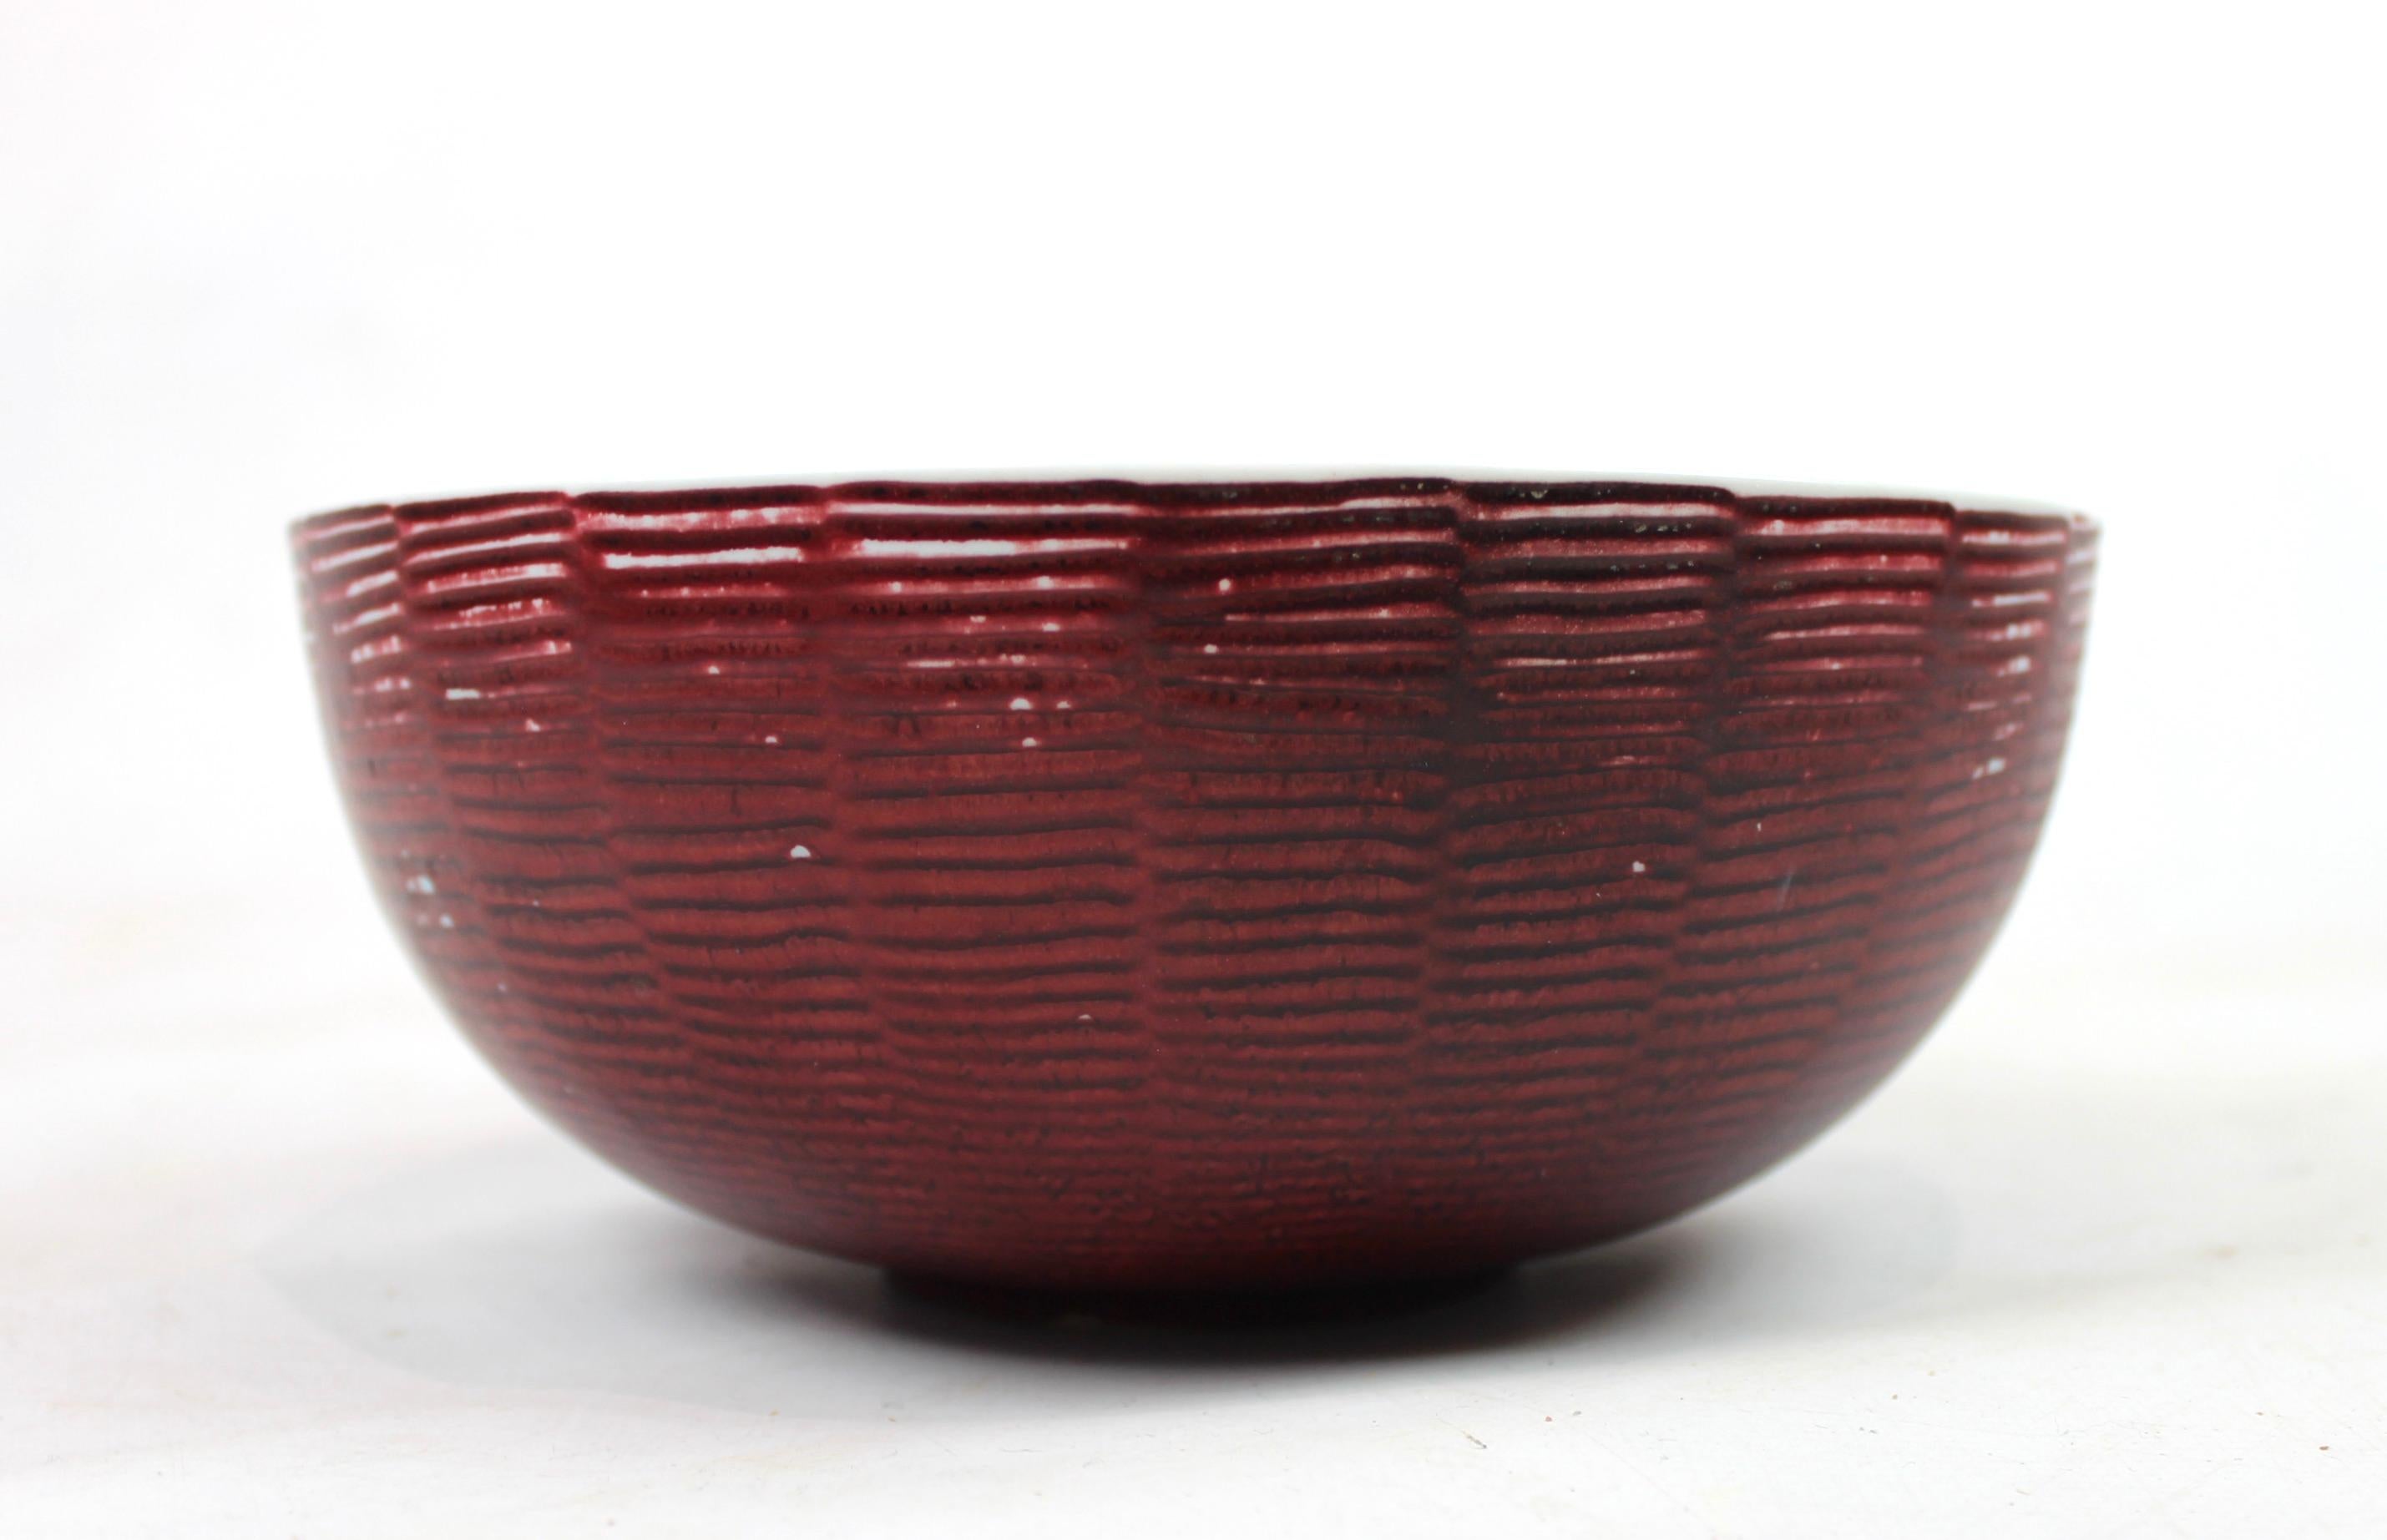 Ceramic bowl with ox blood glaze by Axel Salto for Royal Copenhagen in the 1950s. The bowl is in great vintage condition and model no. 20.717.